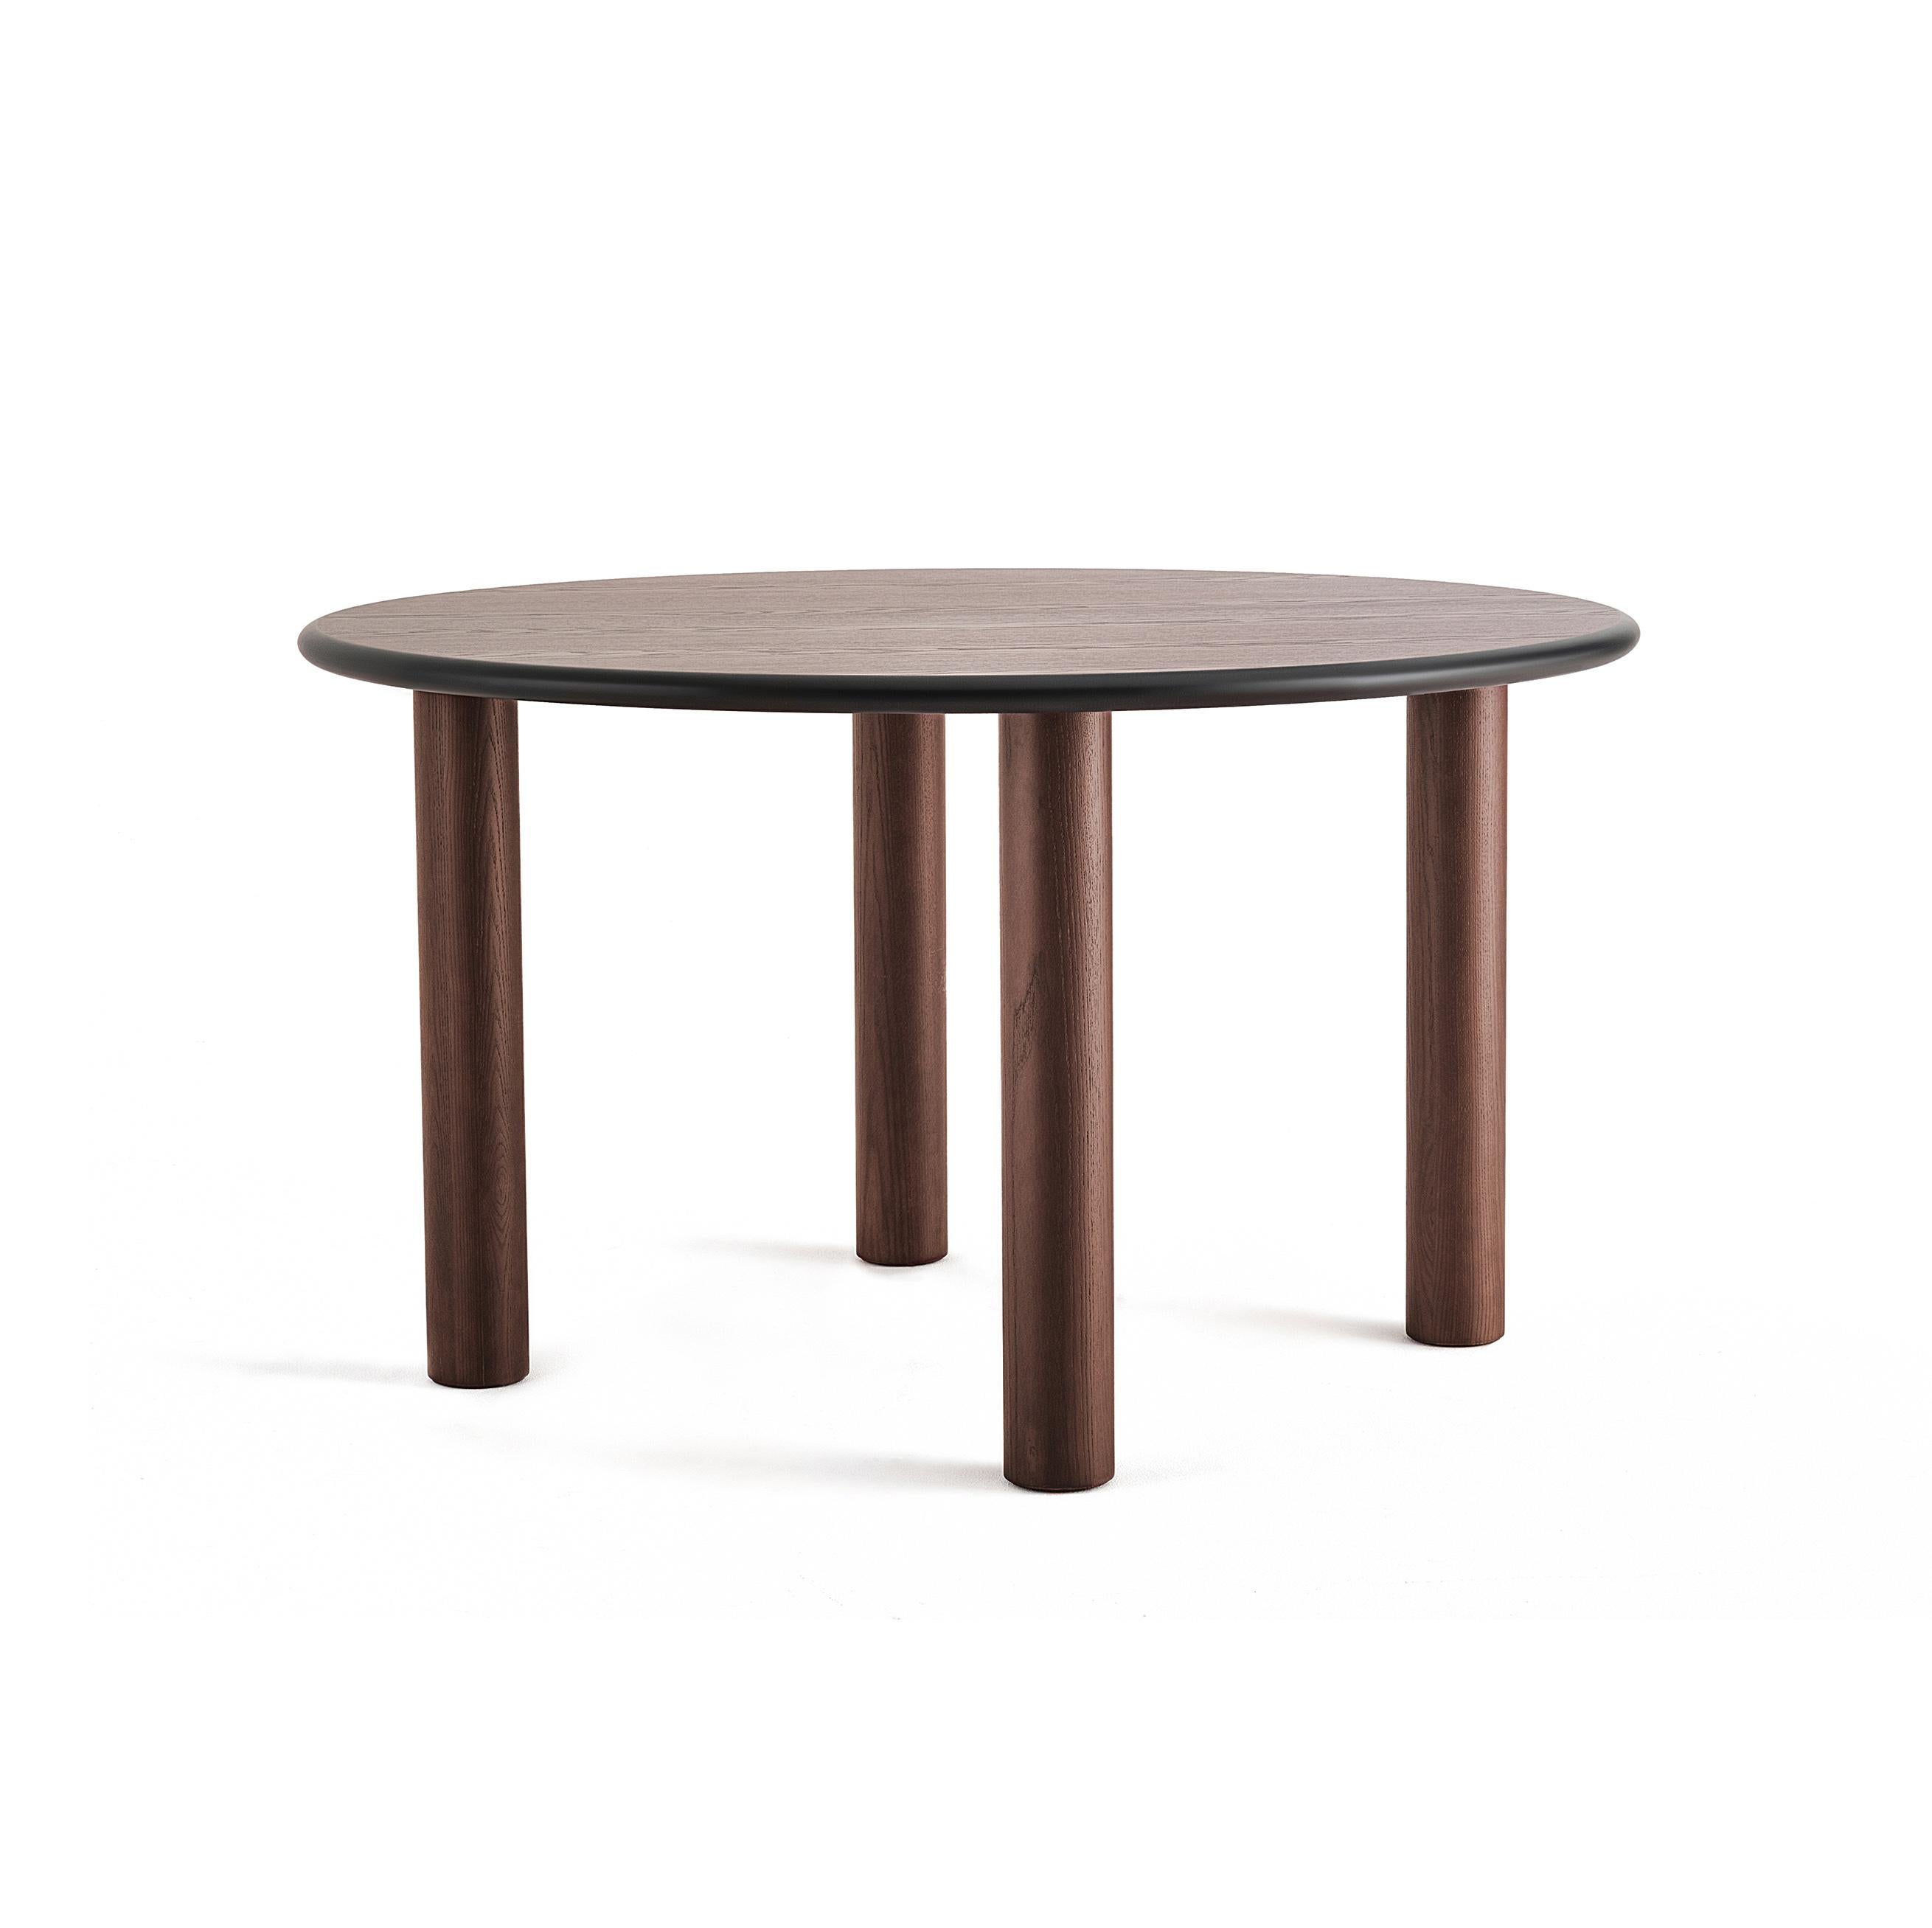 Ash Dining Table Paul Made of Wood by Noom